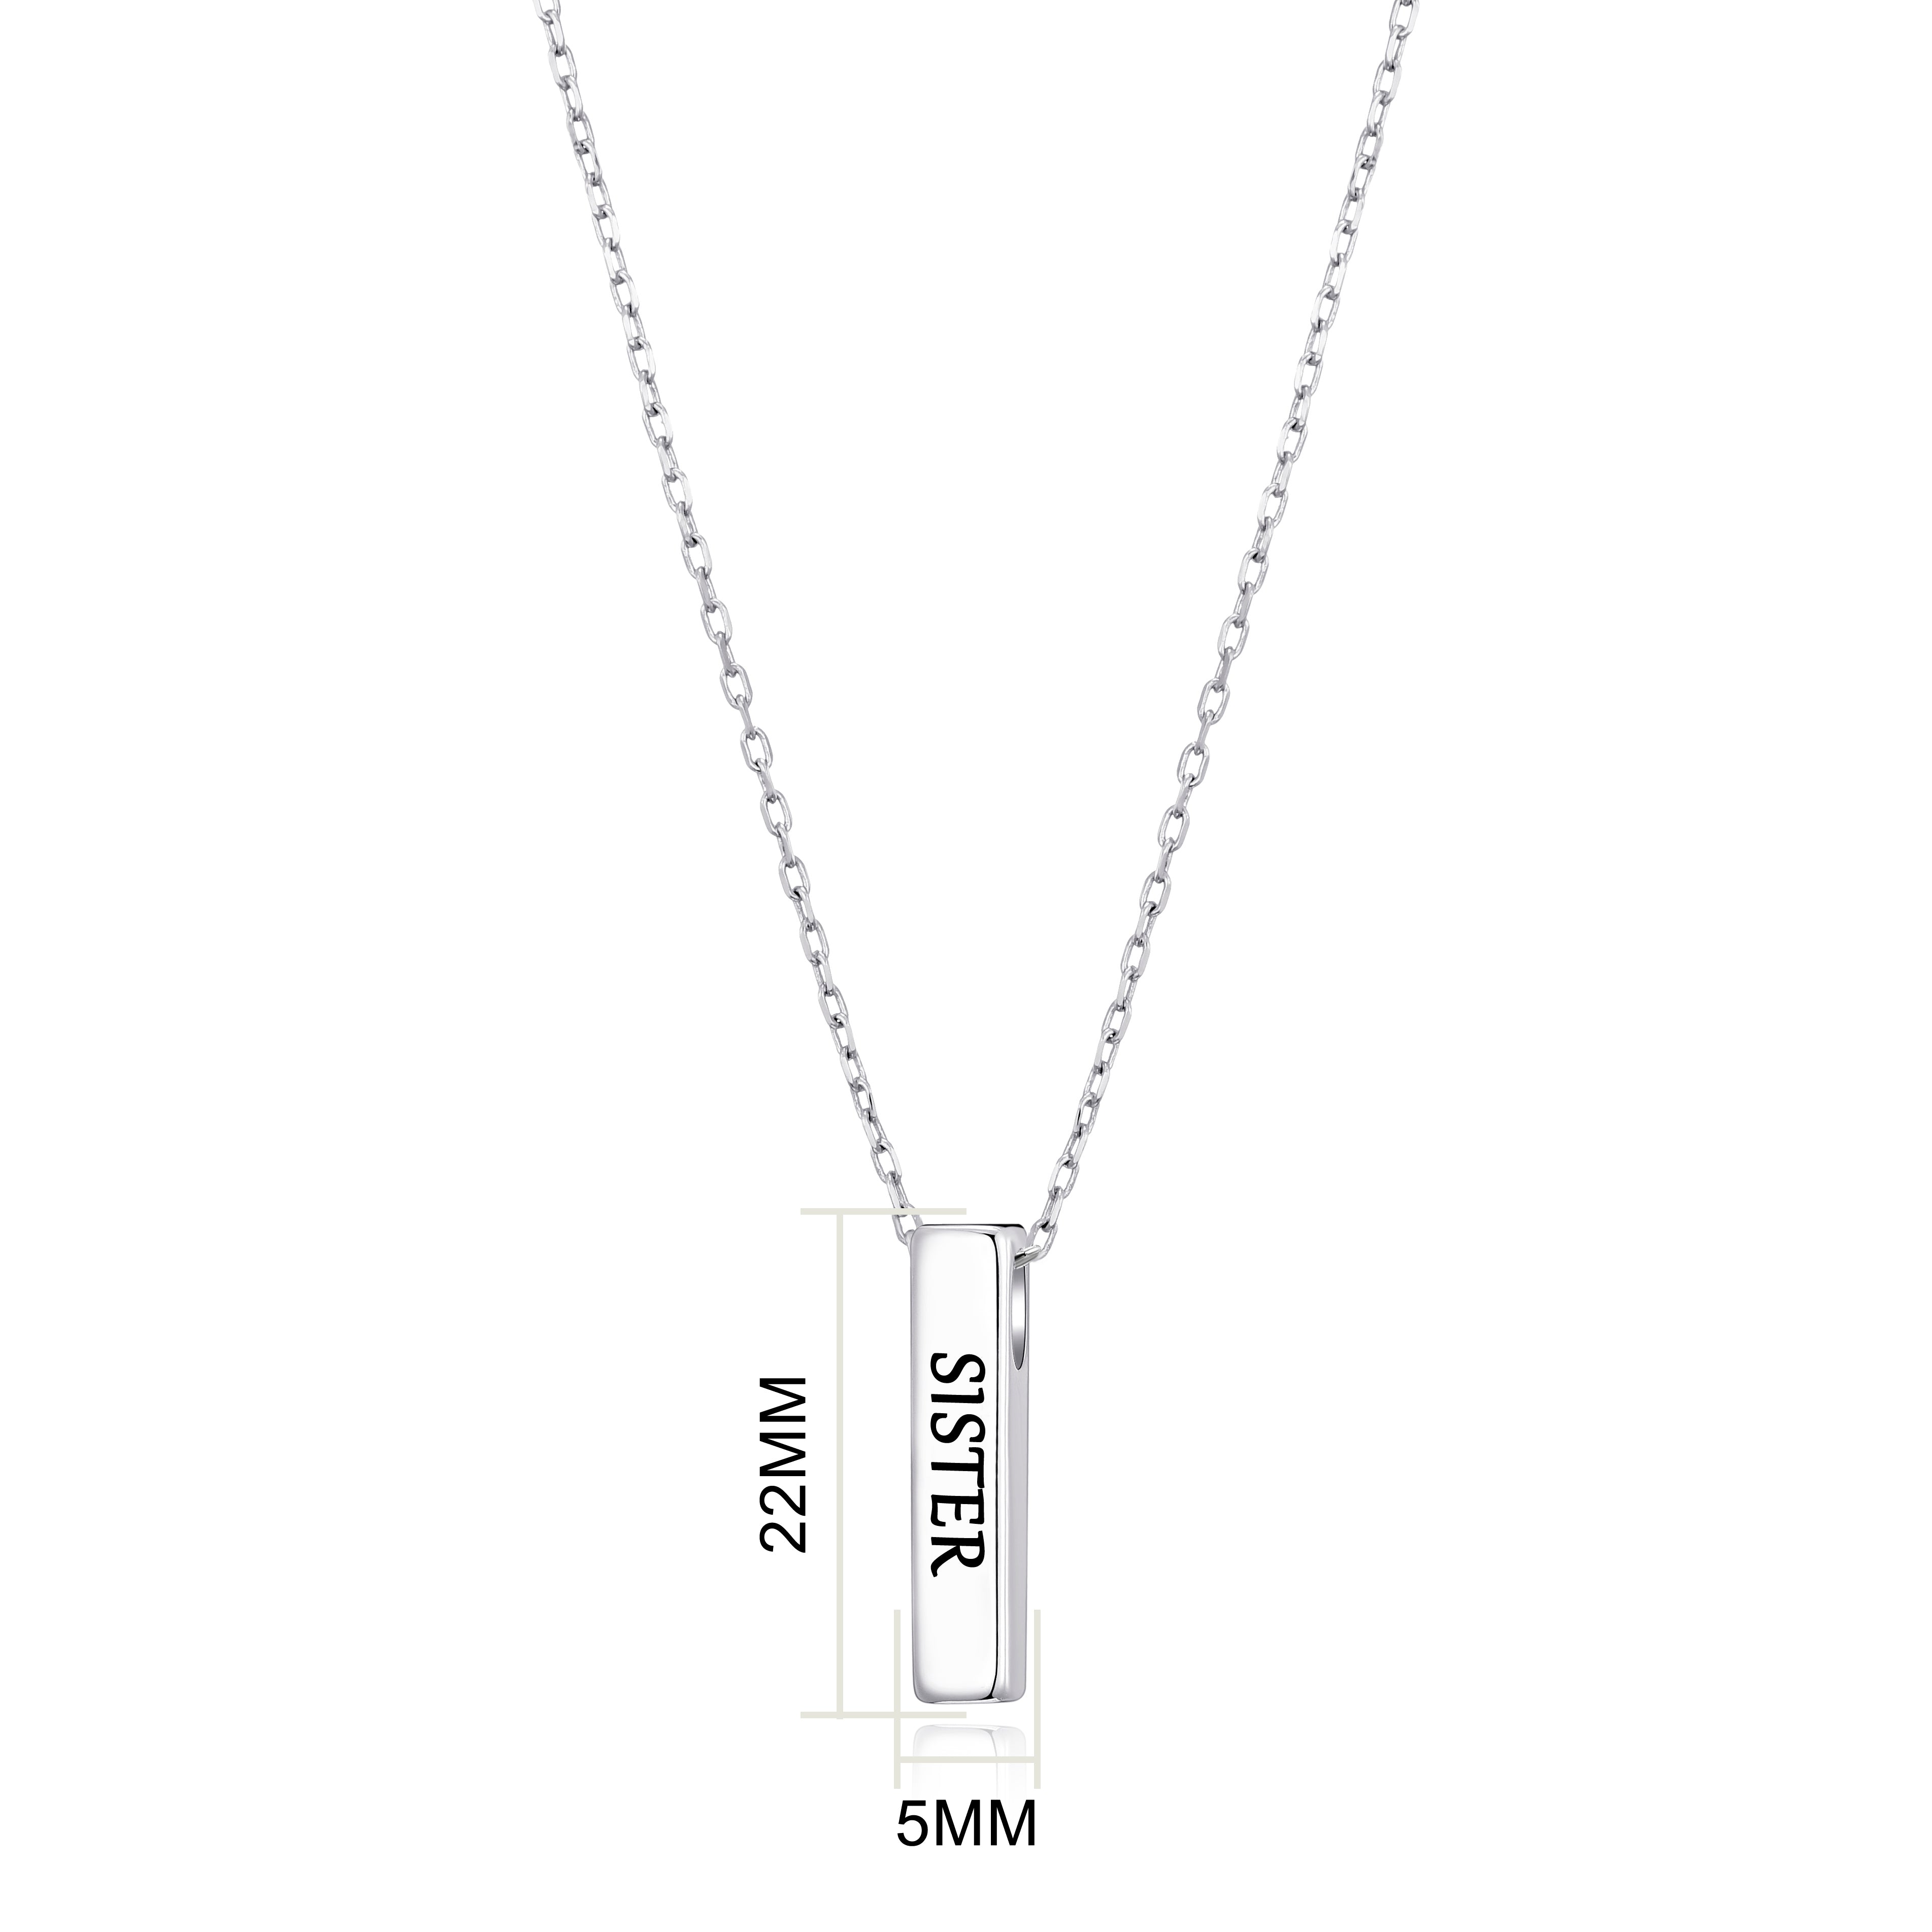 Silver Plated Sister Bar Necklace